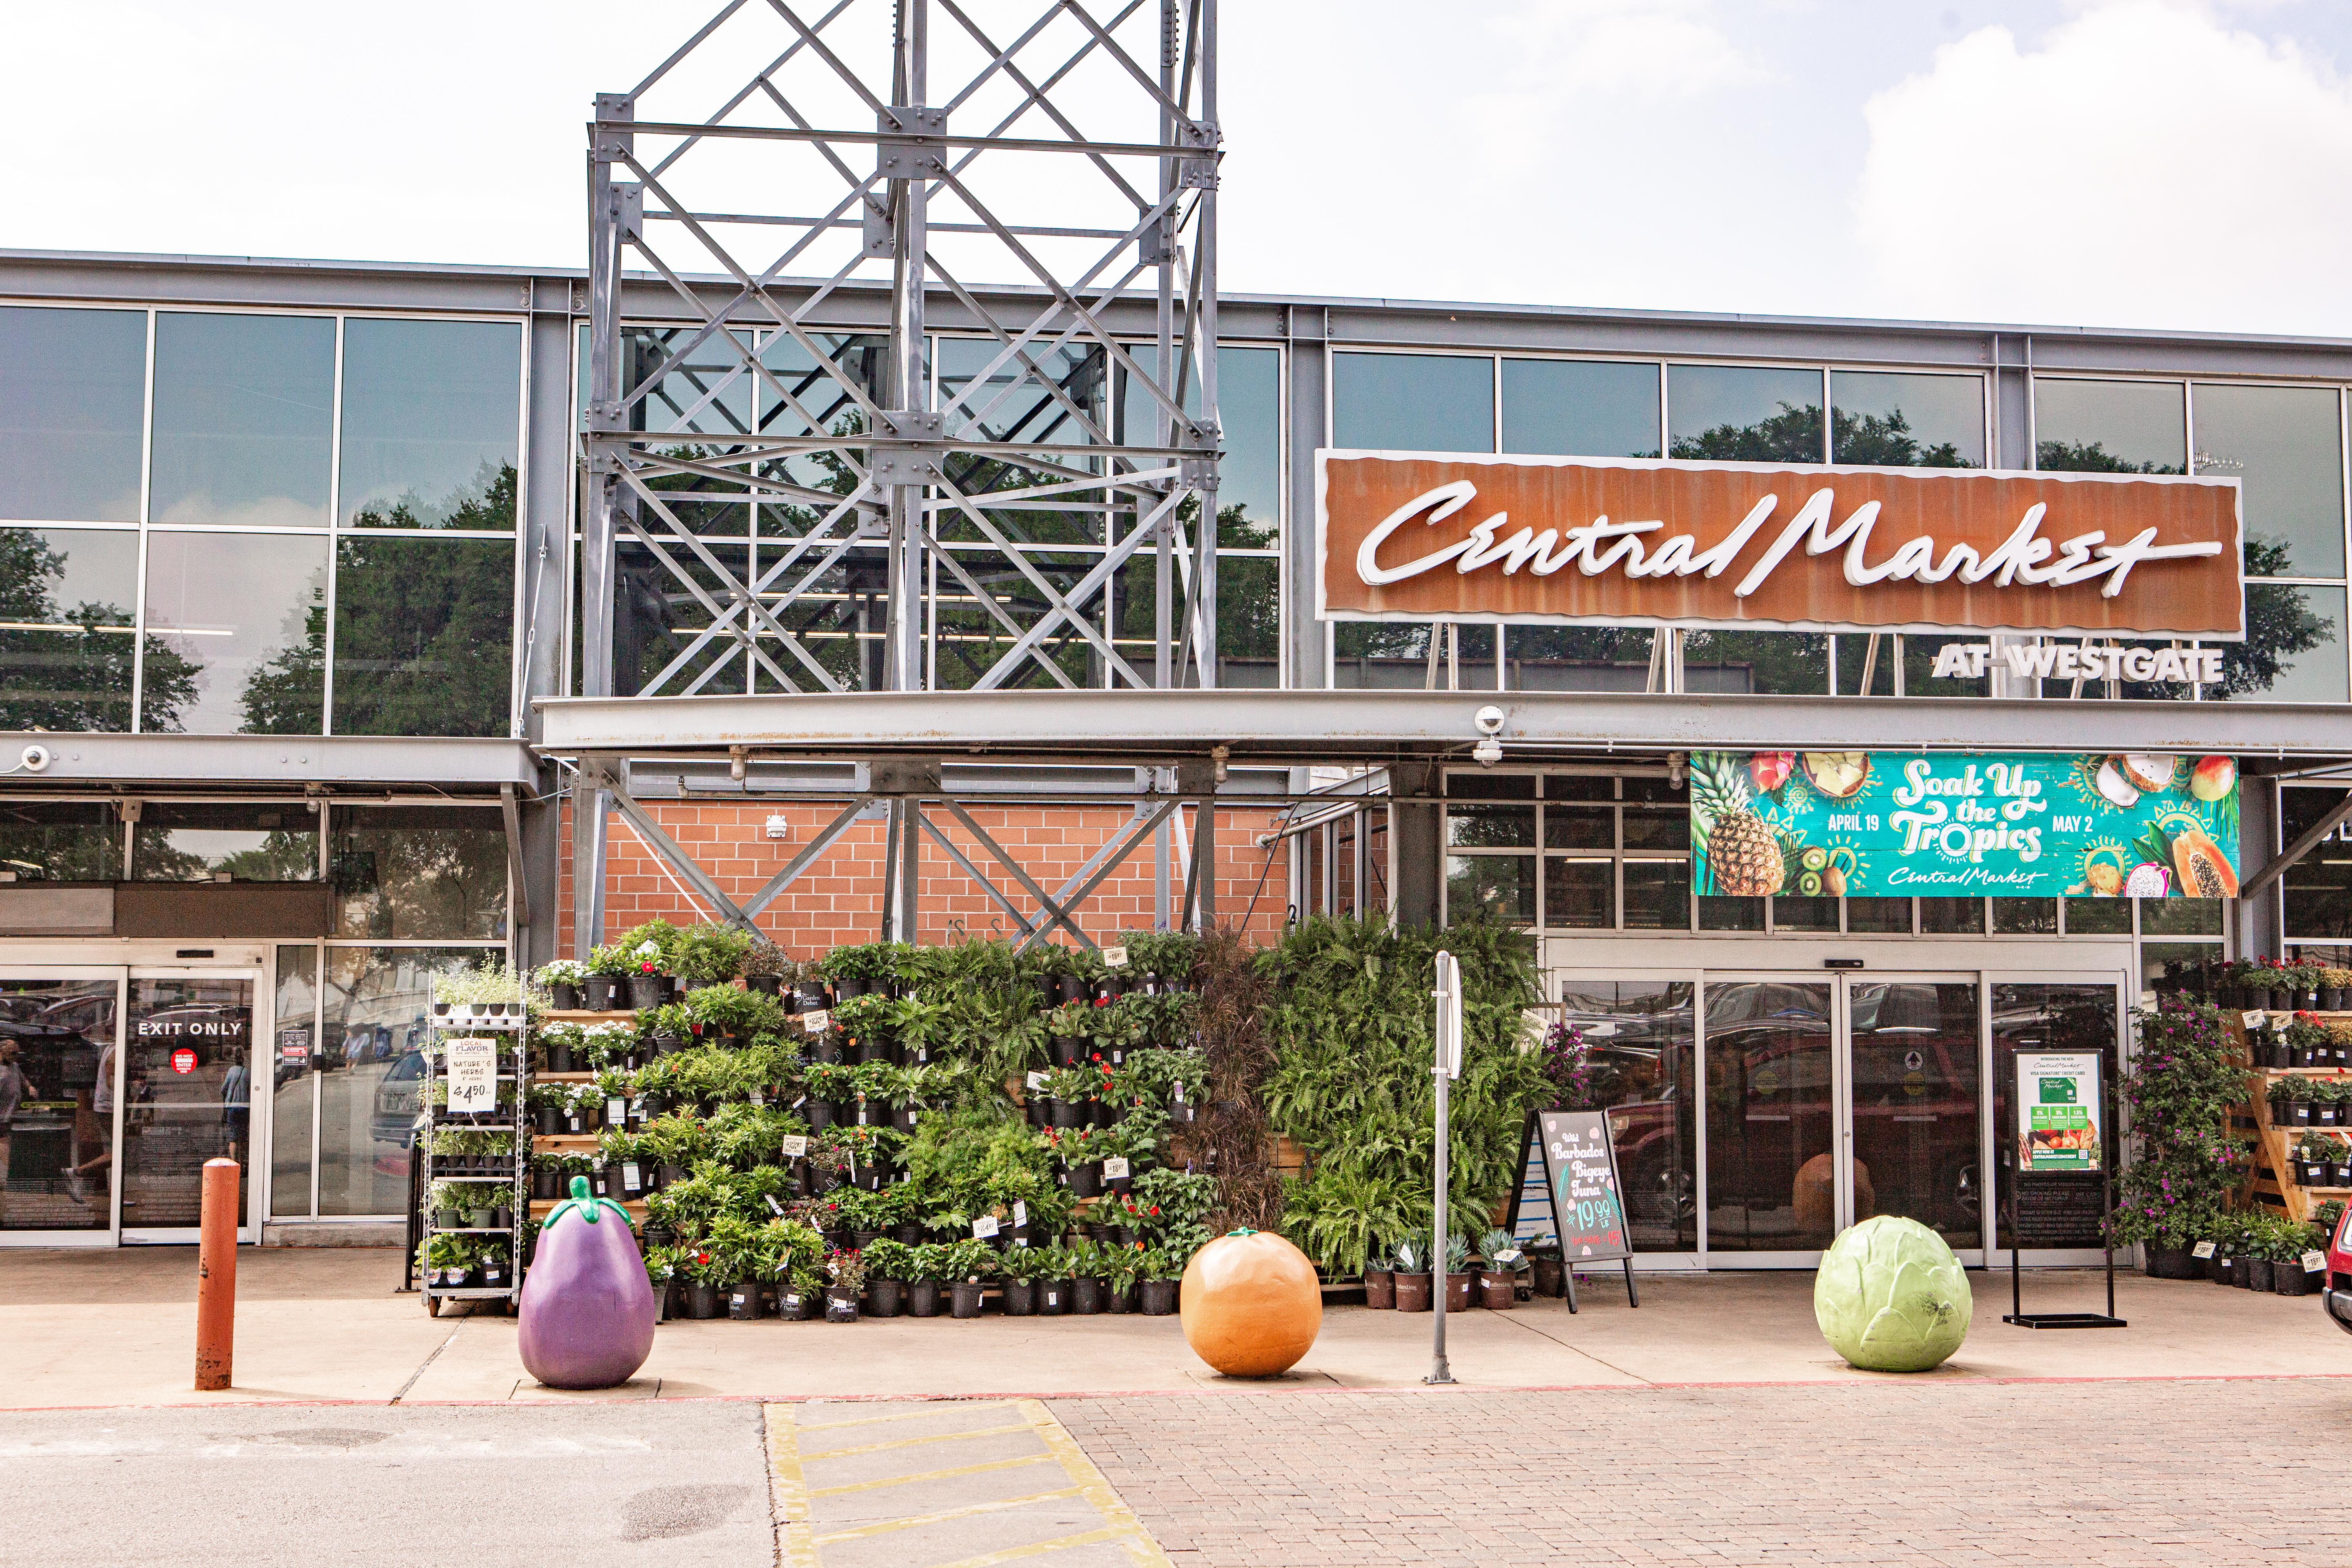 The front of a supermarket with the signage reading “Central Market.”